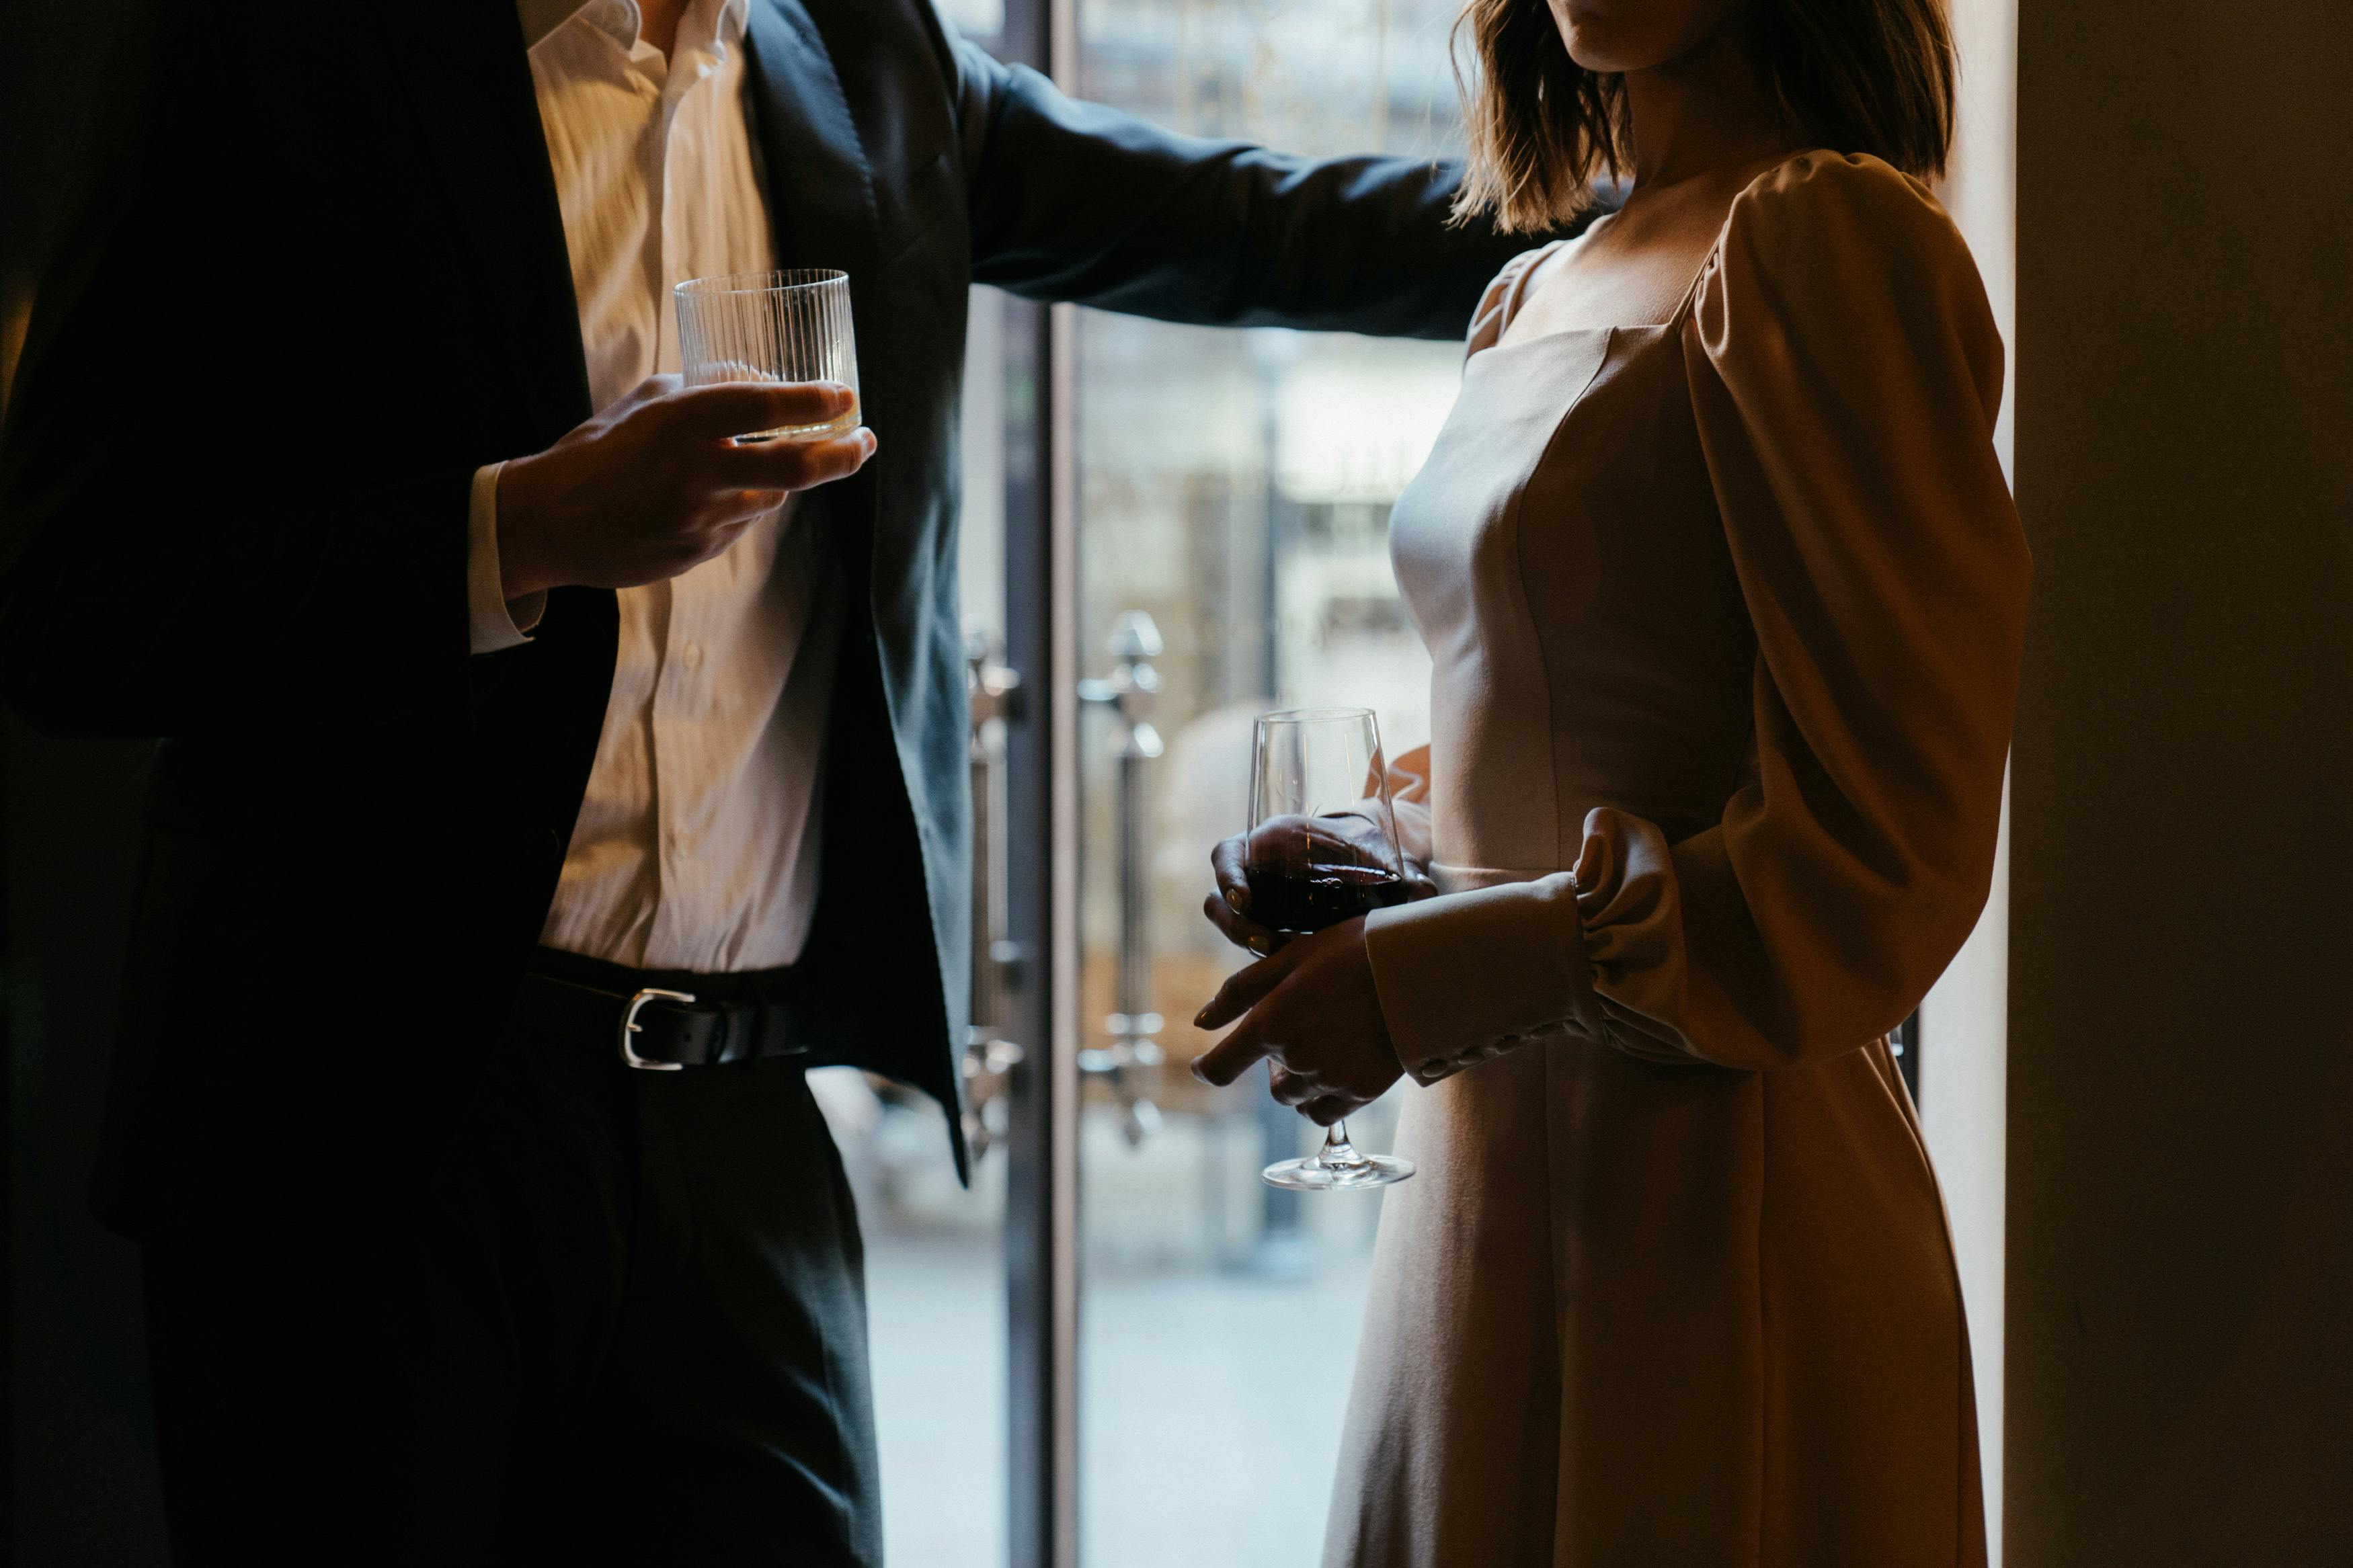 Man and woman on a date drinking wine.